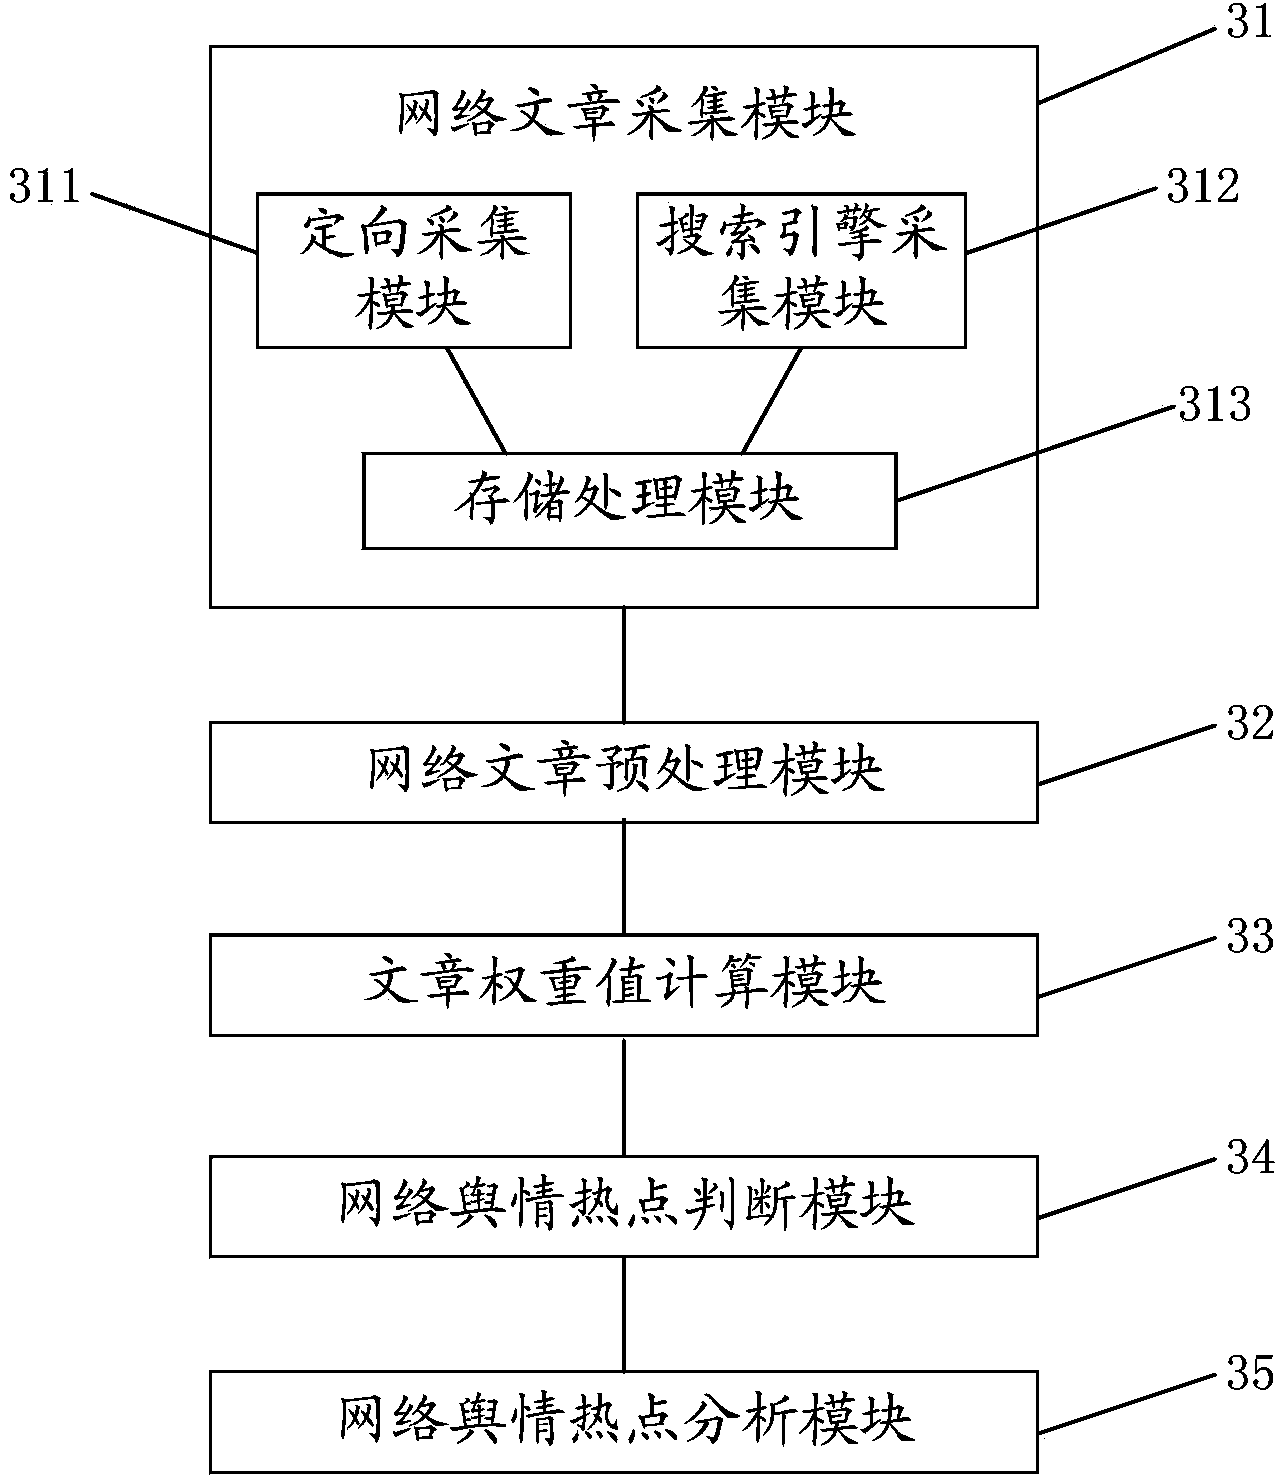 Method and device for finding network public opinion hotspots based on network article attributes